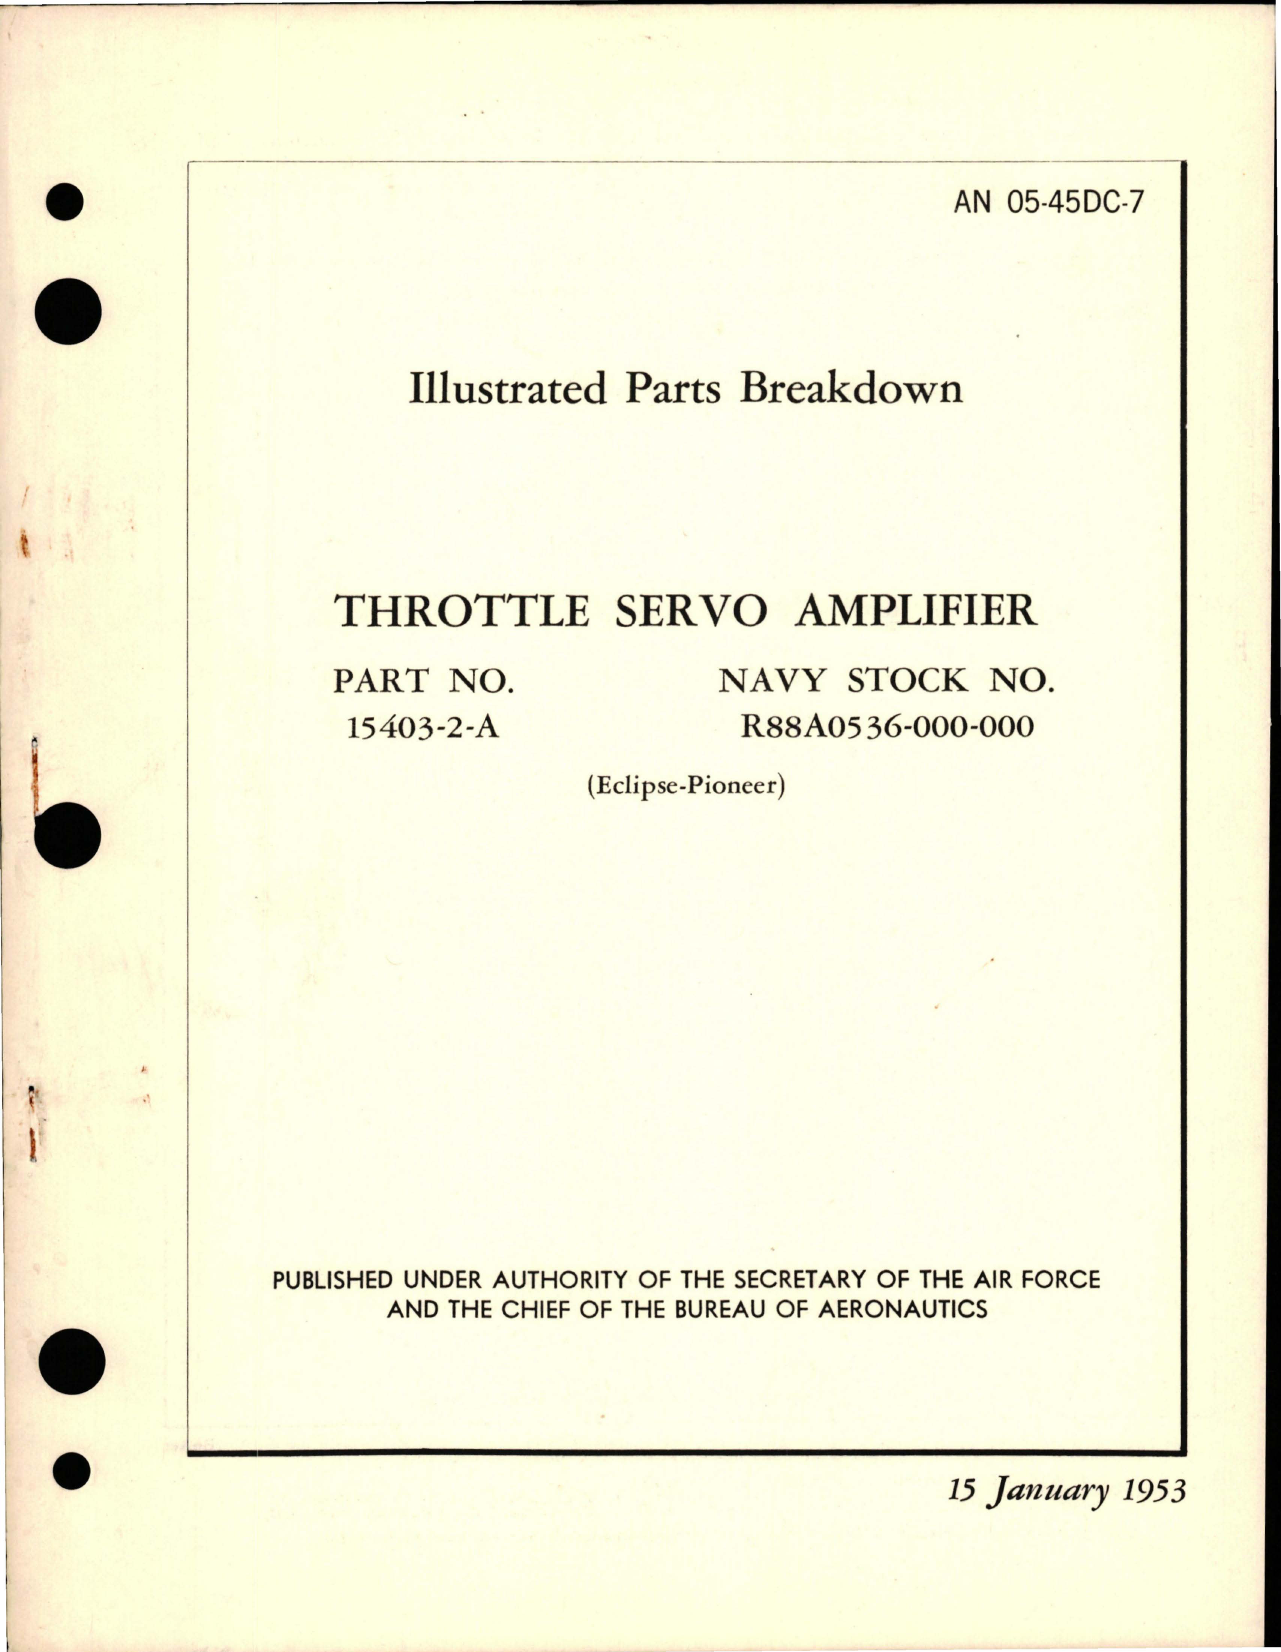 Sample page 1 from AirCorps Library document: Illustrated Parts Breakdown for Throttle Servo Amplifier - Part 15403-2-A 